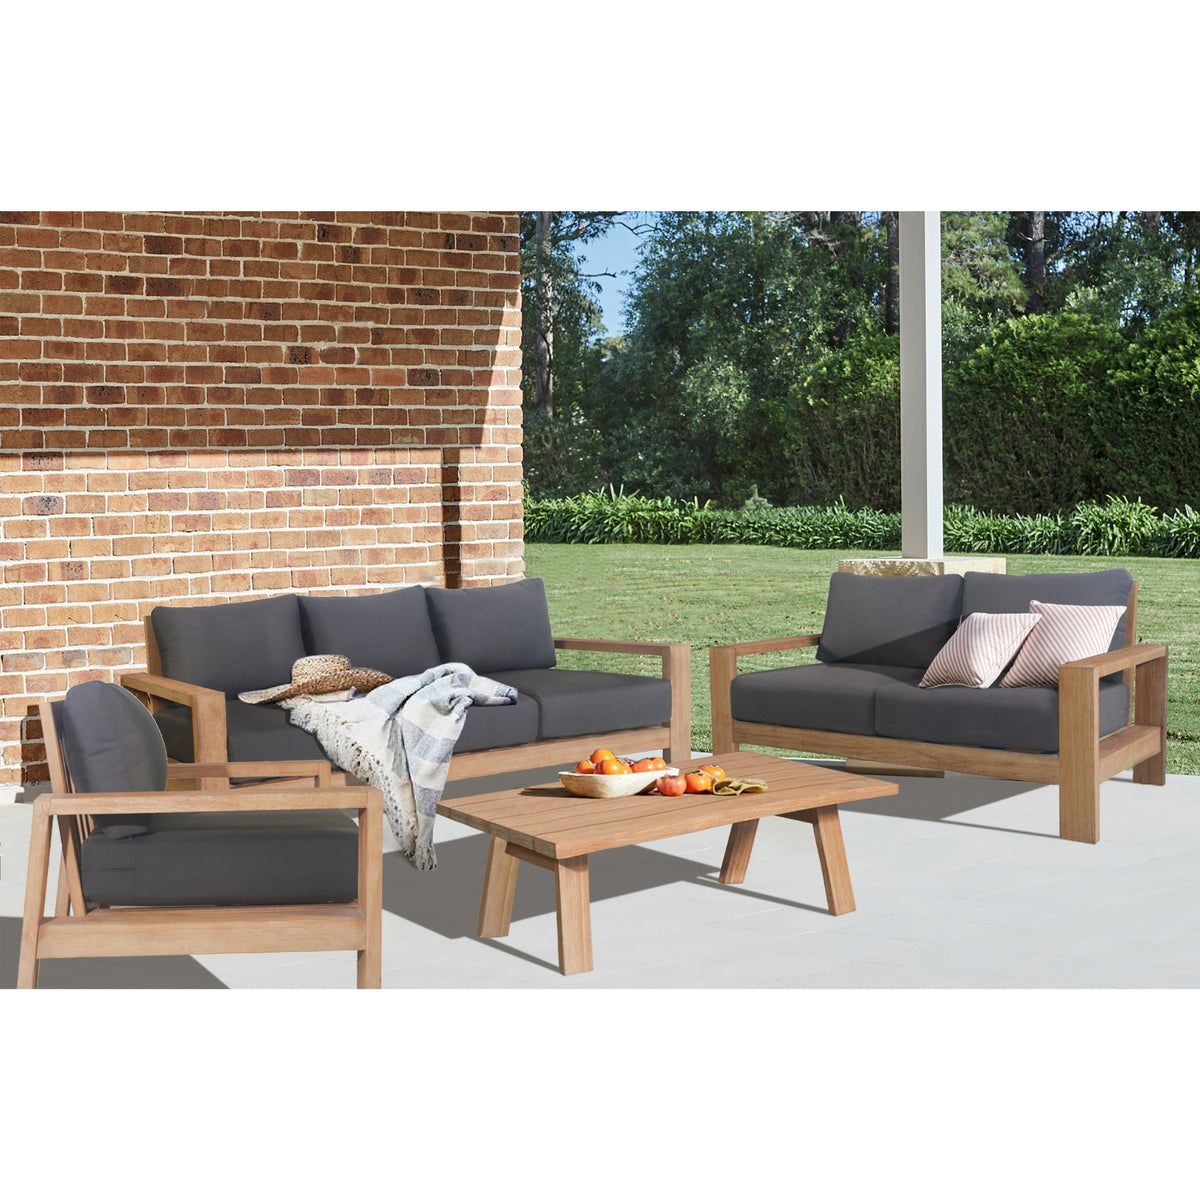 Stud 4pc 3+2+1 Seater Outdoor Patio Sofa Lounge Set Solid Timber Coffee Table